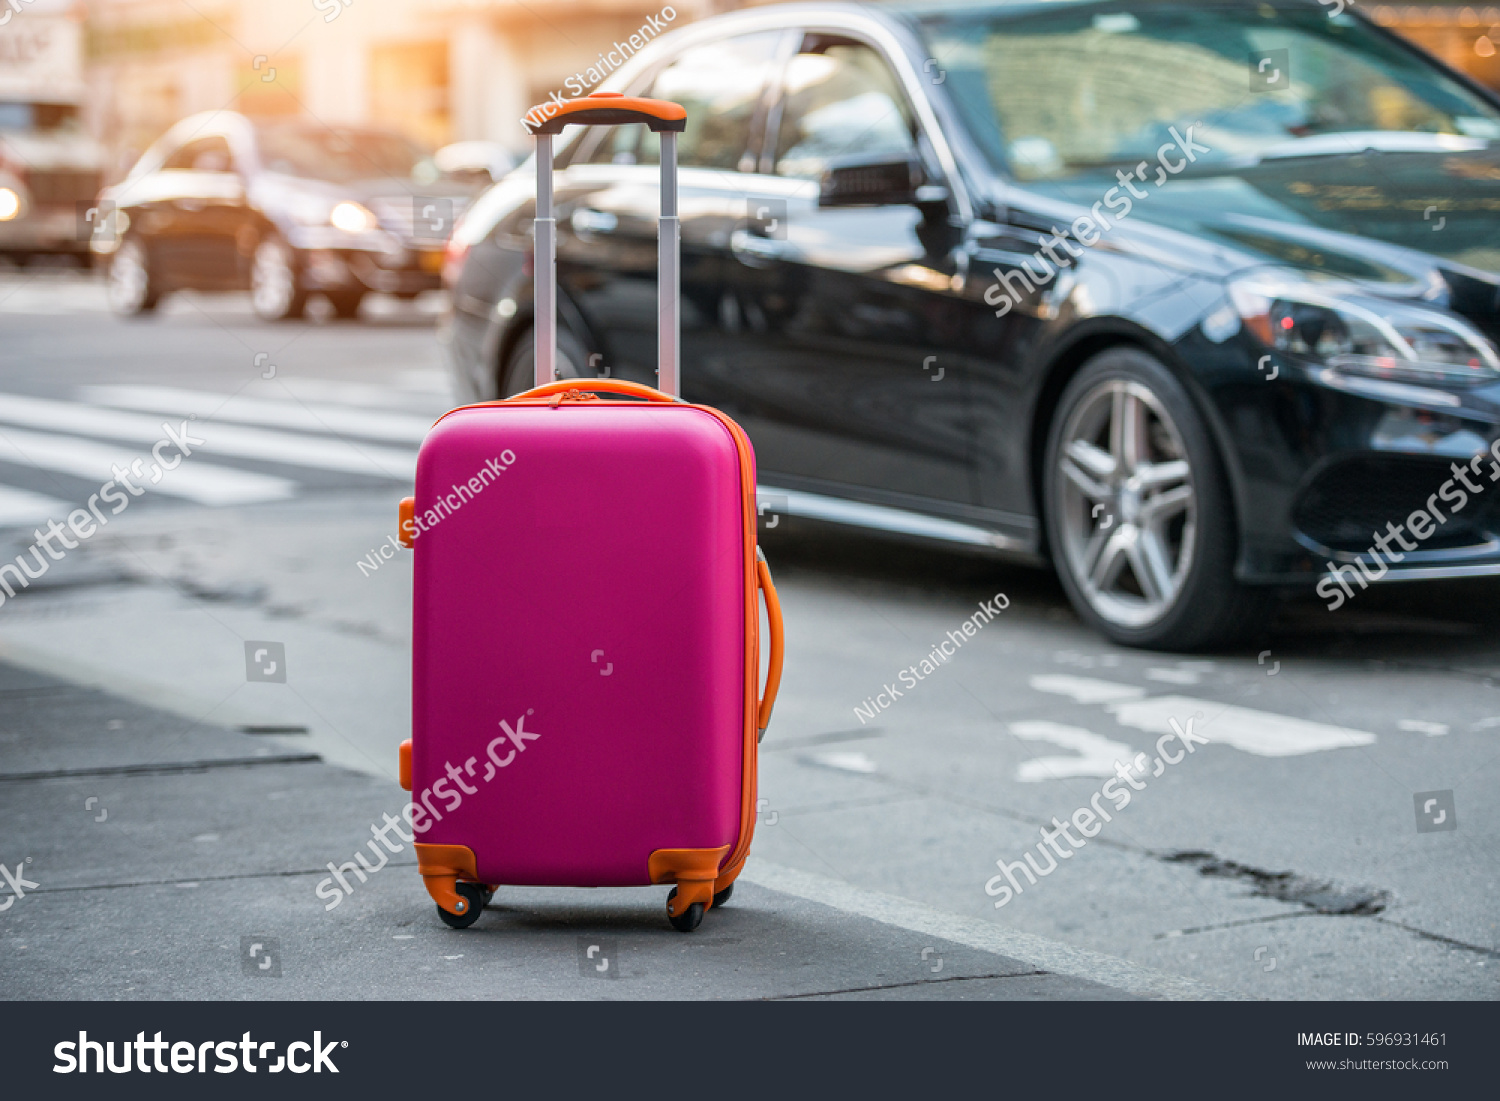 Luggage bag on the city street ready to pick by airport transfer taxi car. #596931461